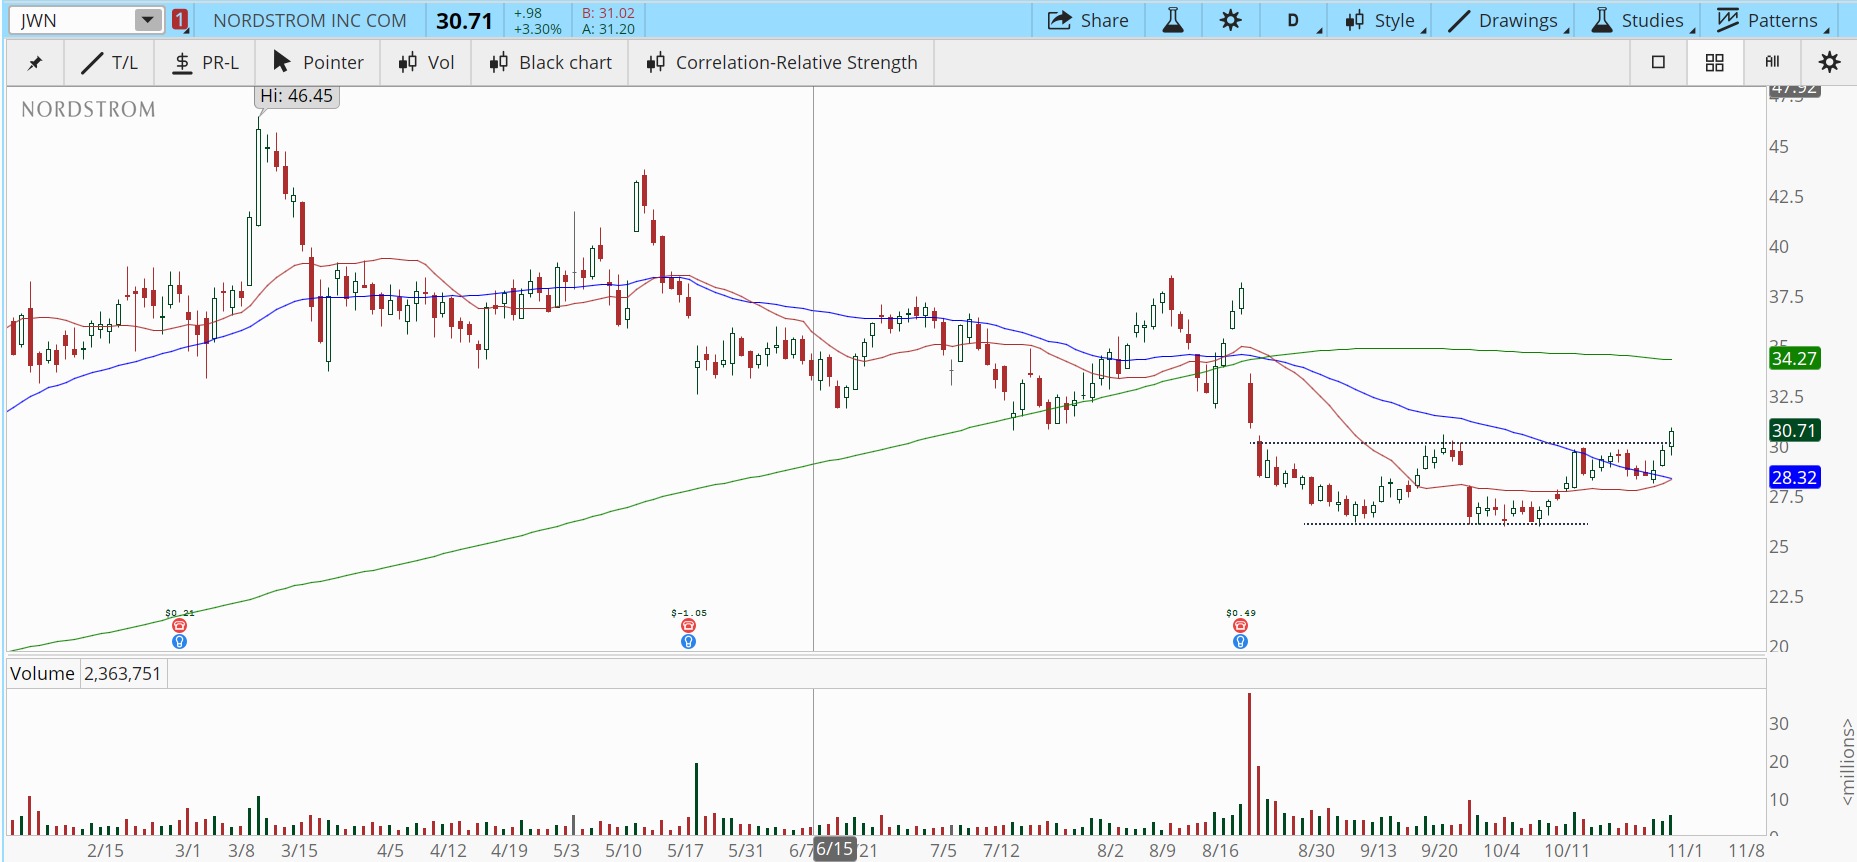 Nordstrom (JWN) stock chart with double bottom breakout